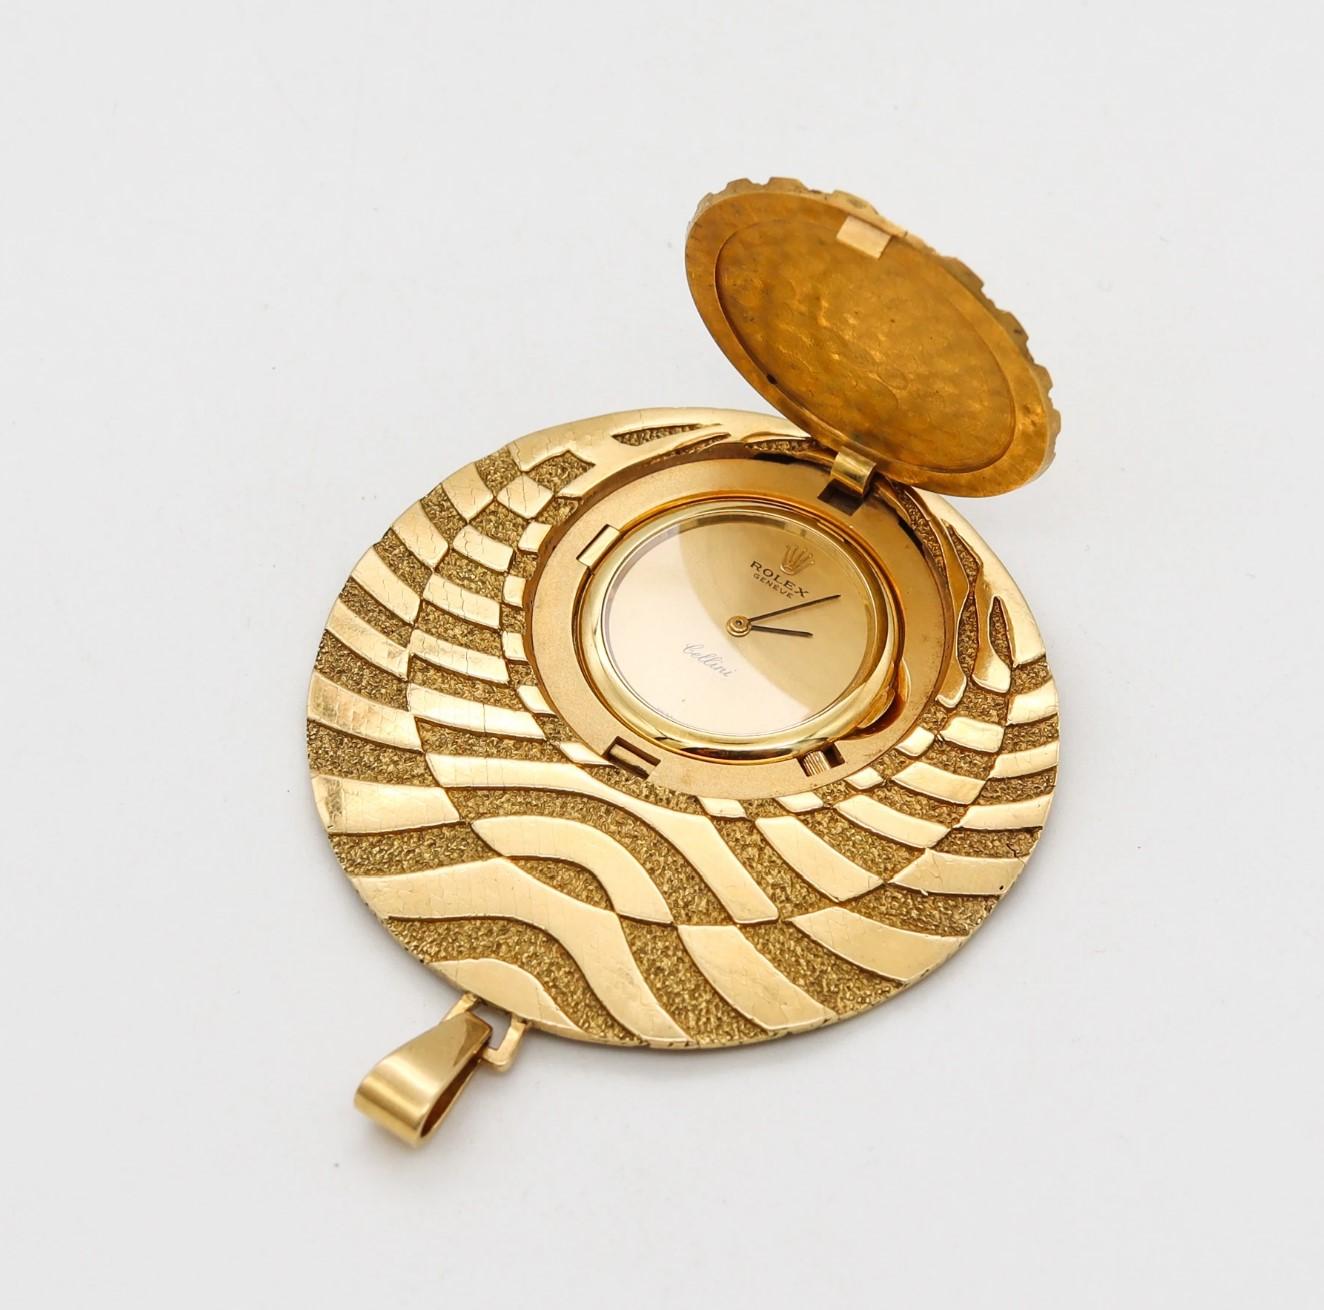 Modernist George L'Enfant 1970 For Rolex Watch Very Rare Op-Art Pendant 18Kt Yellow Gold For Sale